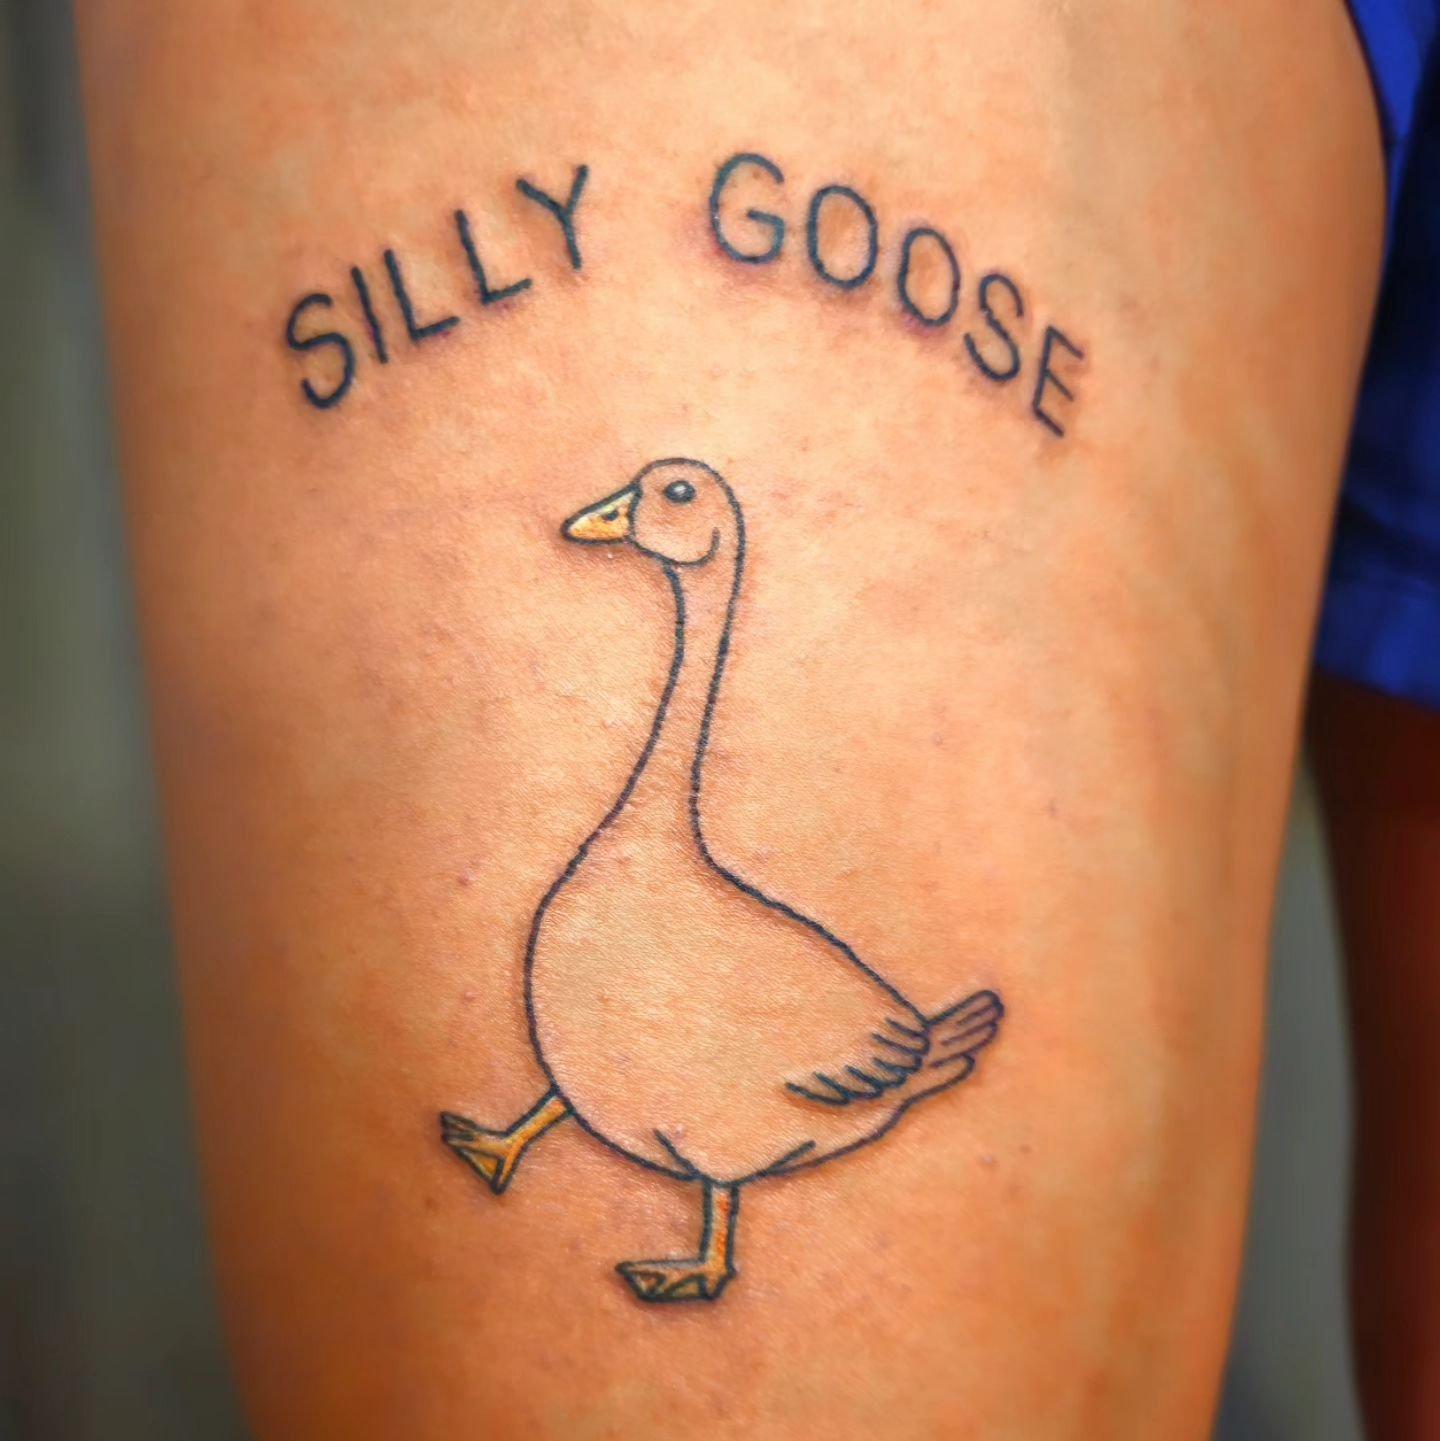 Silly goose for a silly goose!
This was a quick and fun piece. Thanks so much for coming in!

Find me at @robotpiercingtattoo